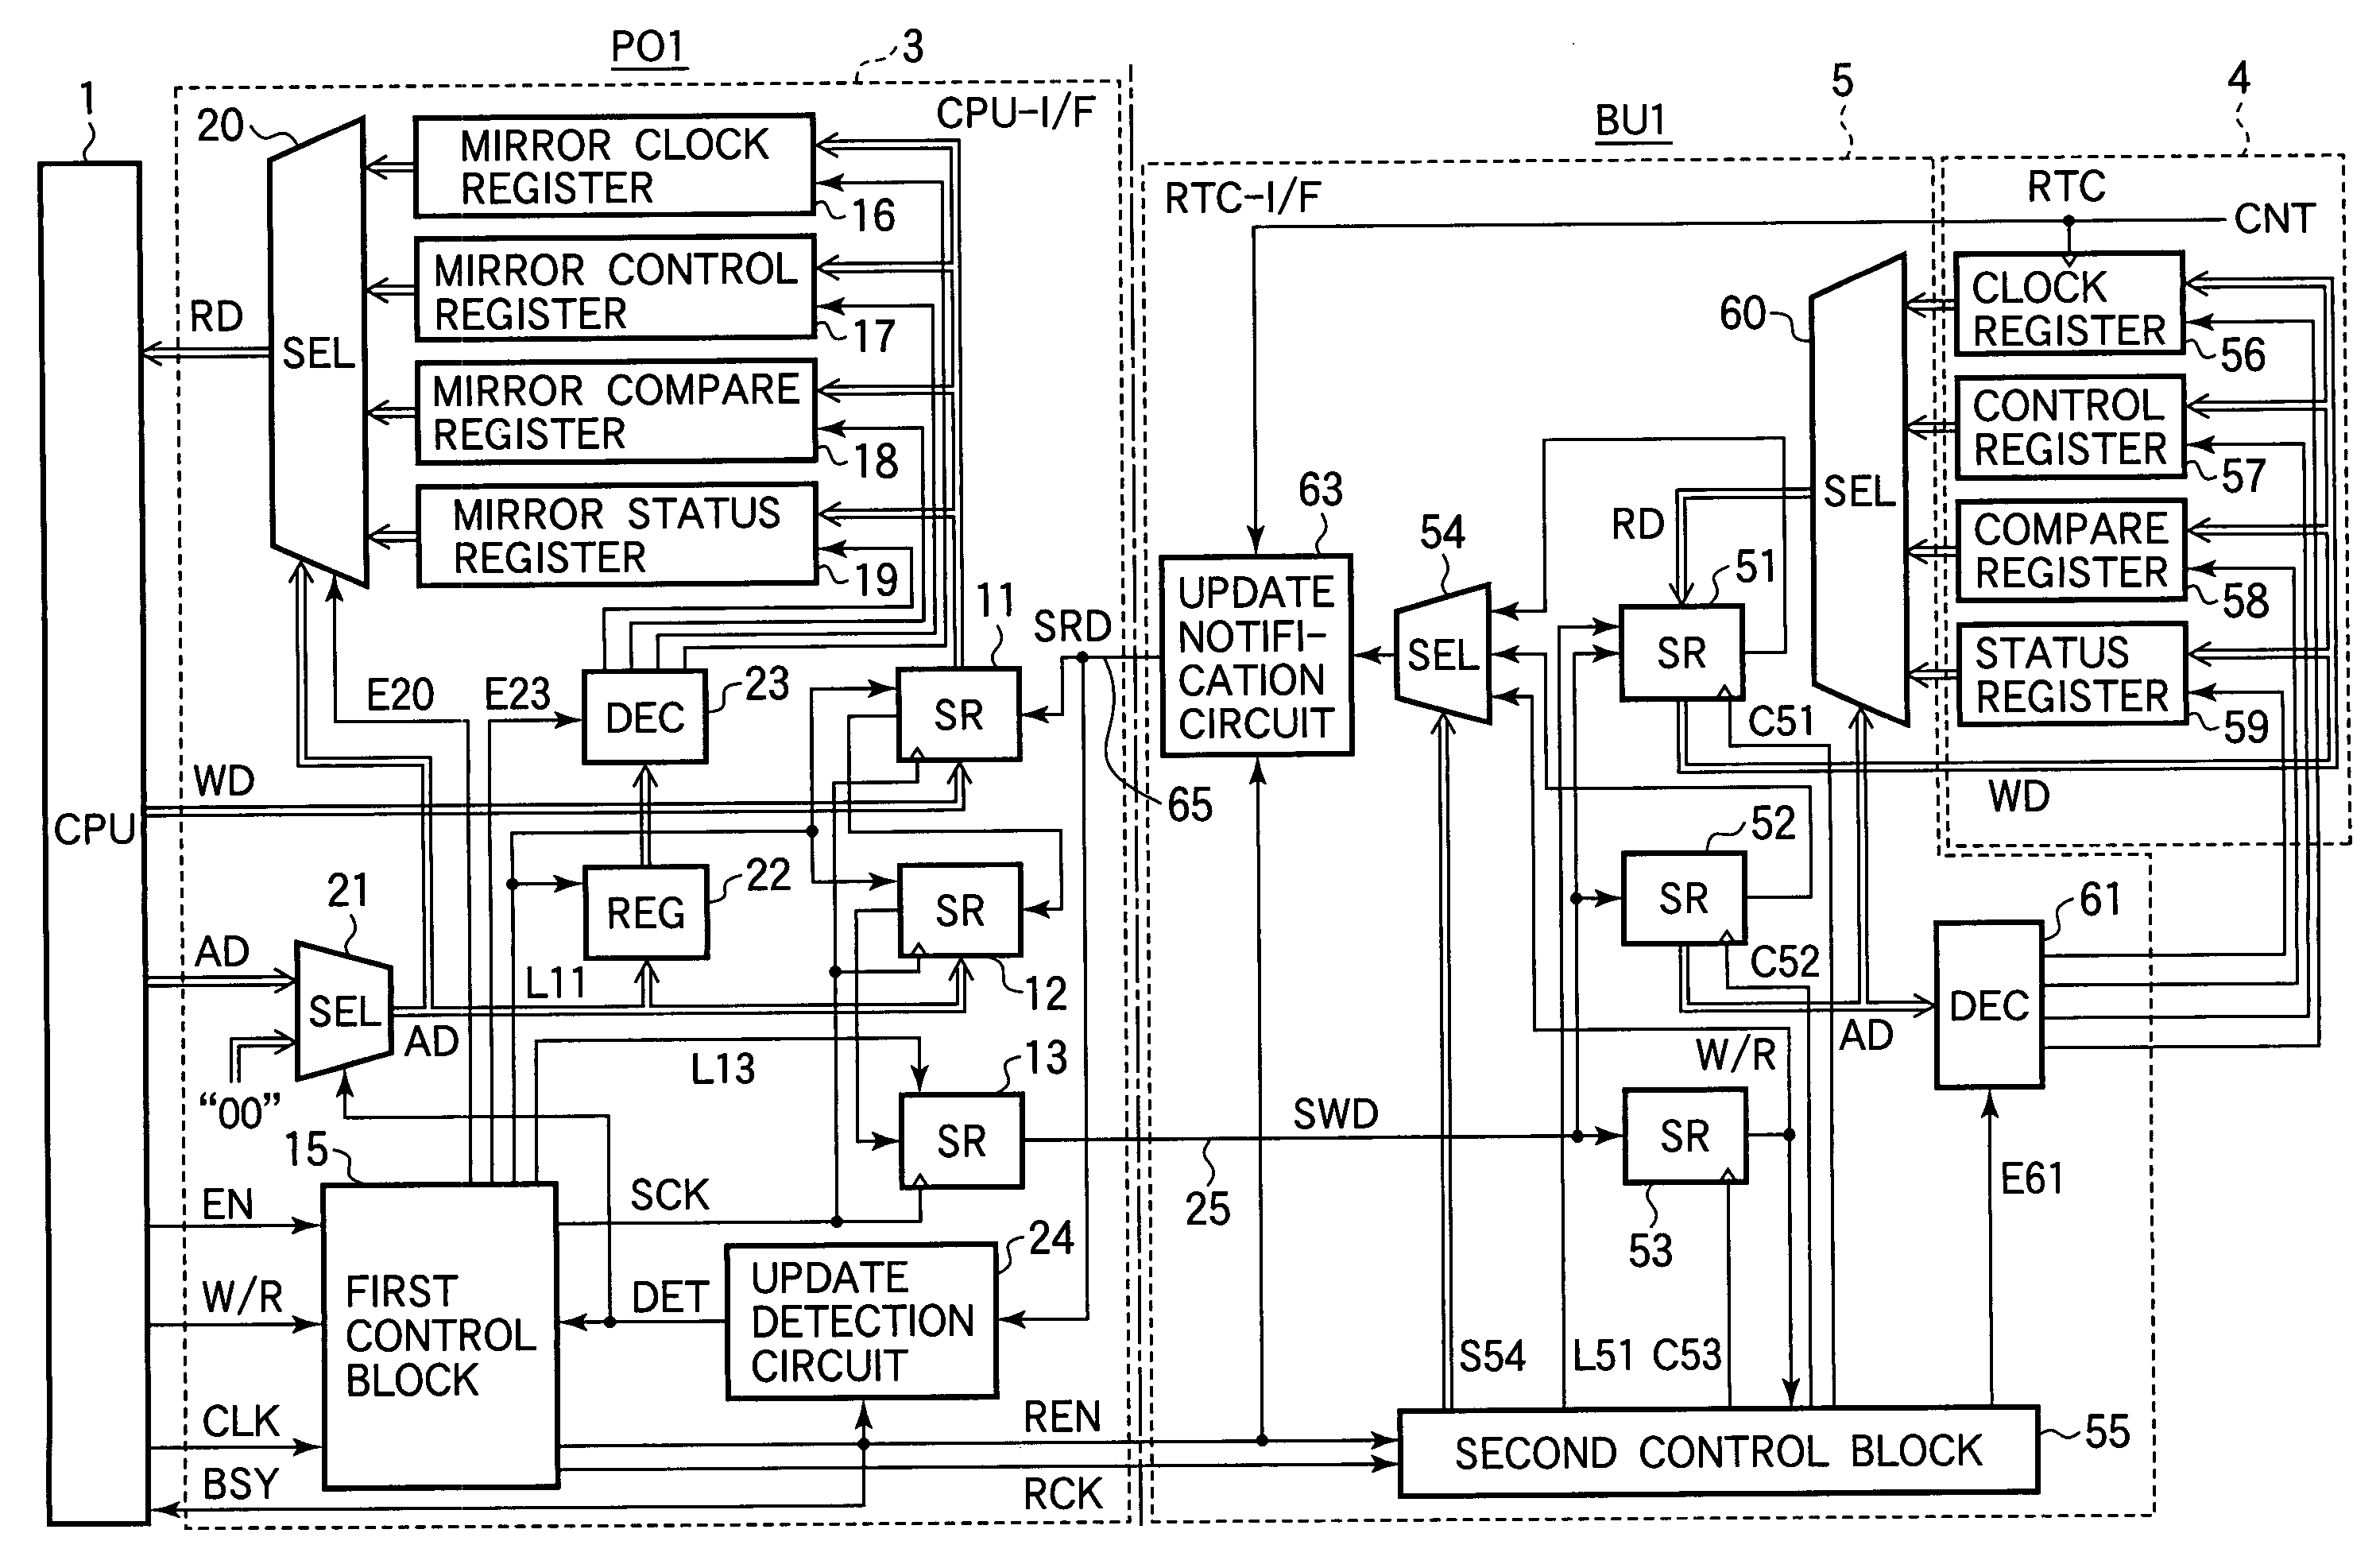 Serial interface circuit for data transfer